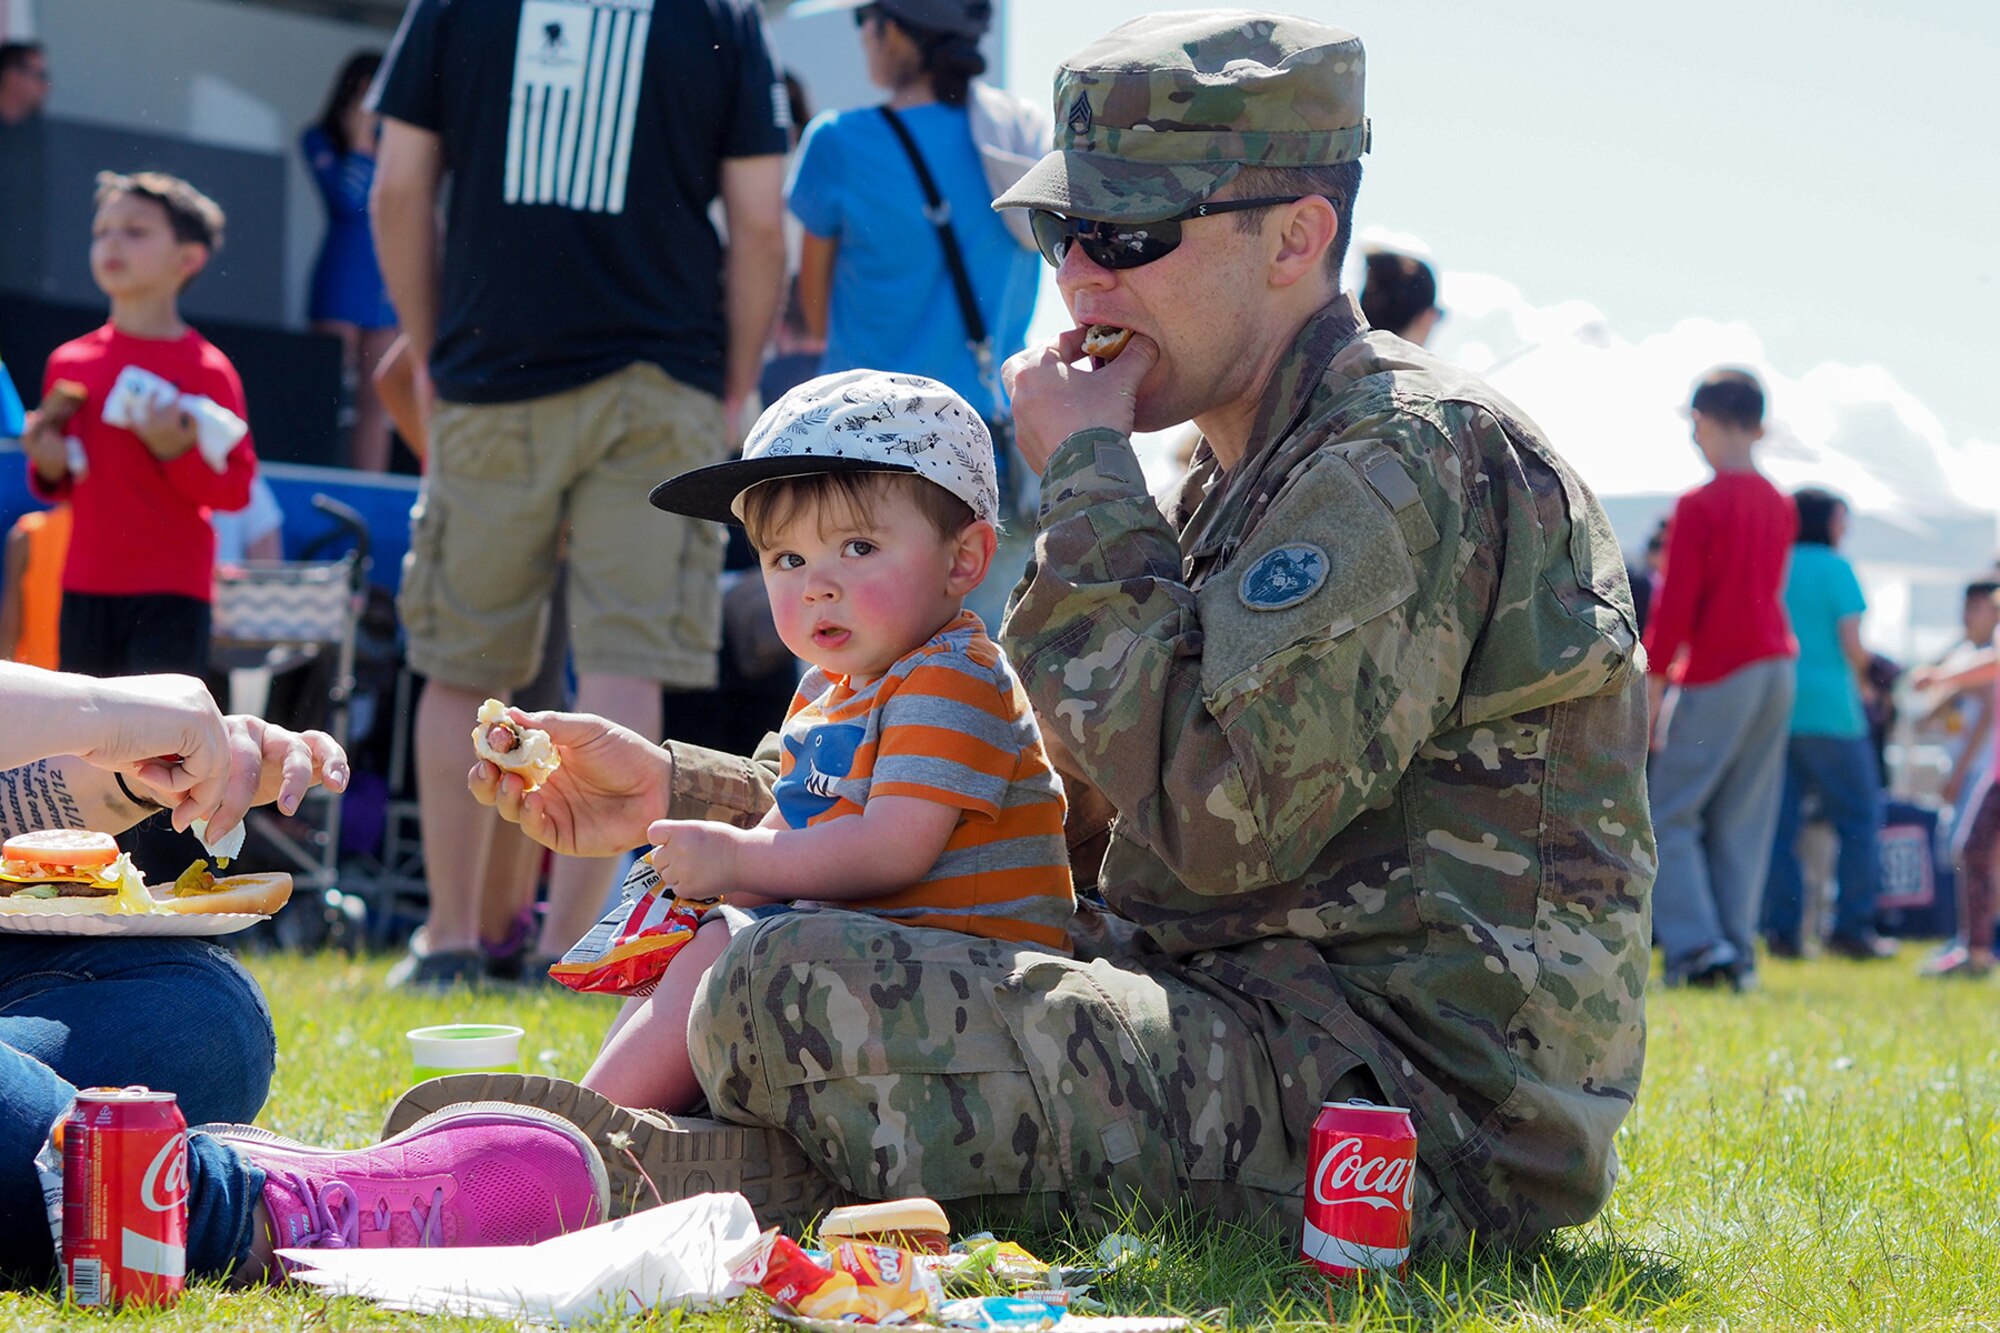 Army Staff Sgt. David Riley, assigned to the 109th Transportation Company, 17th Combat Sustainment Support Battalion, U.S. Army Alaska, holds his son Finley Riley, 18-months-old, at the annual Military Appreciation Week picnic at the Joint Base Elmendorf-Richardson, Alaska, Buckner Fitness Center fields June 16, 2017.  Several organizations came together to provide a variety of family-fun activities such as competitive sporting events for the adults, face painting and bouncy houses for the children in addition to the Anchorage Chamber of Commerce-provided food and music during the annual event.